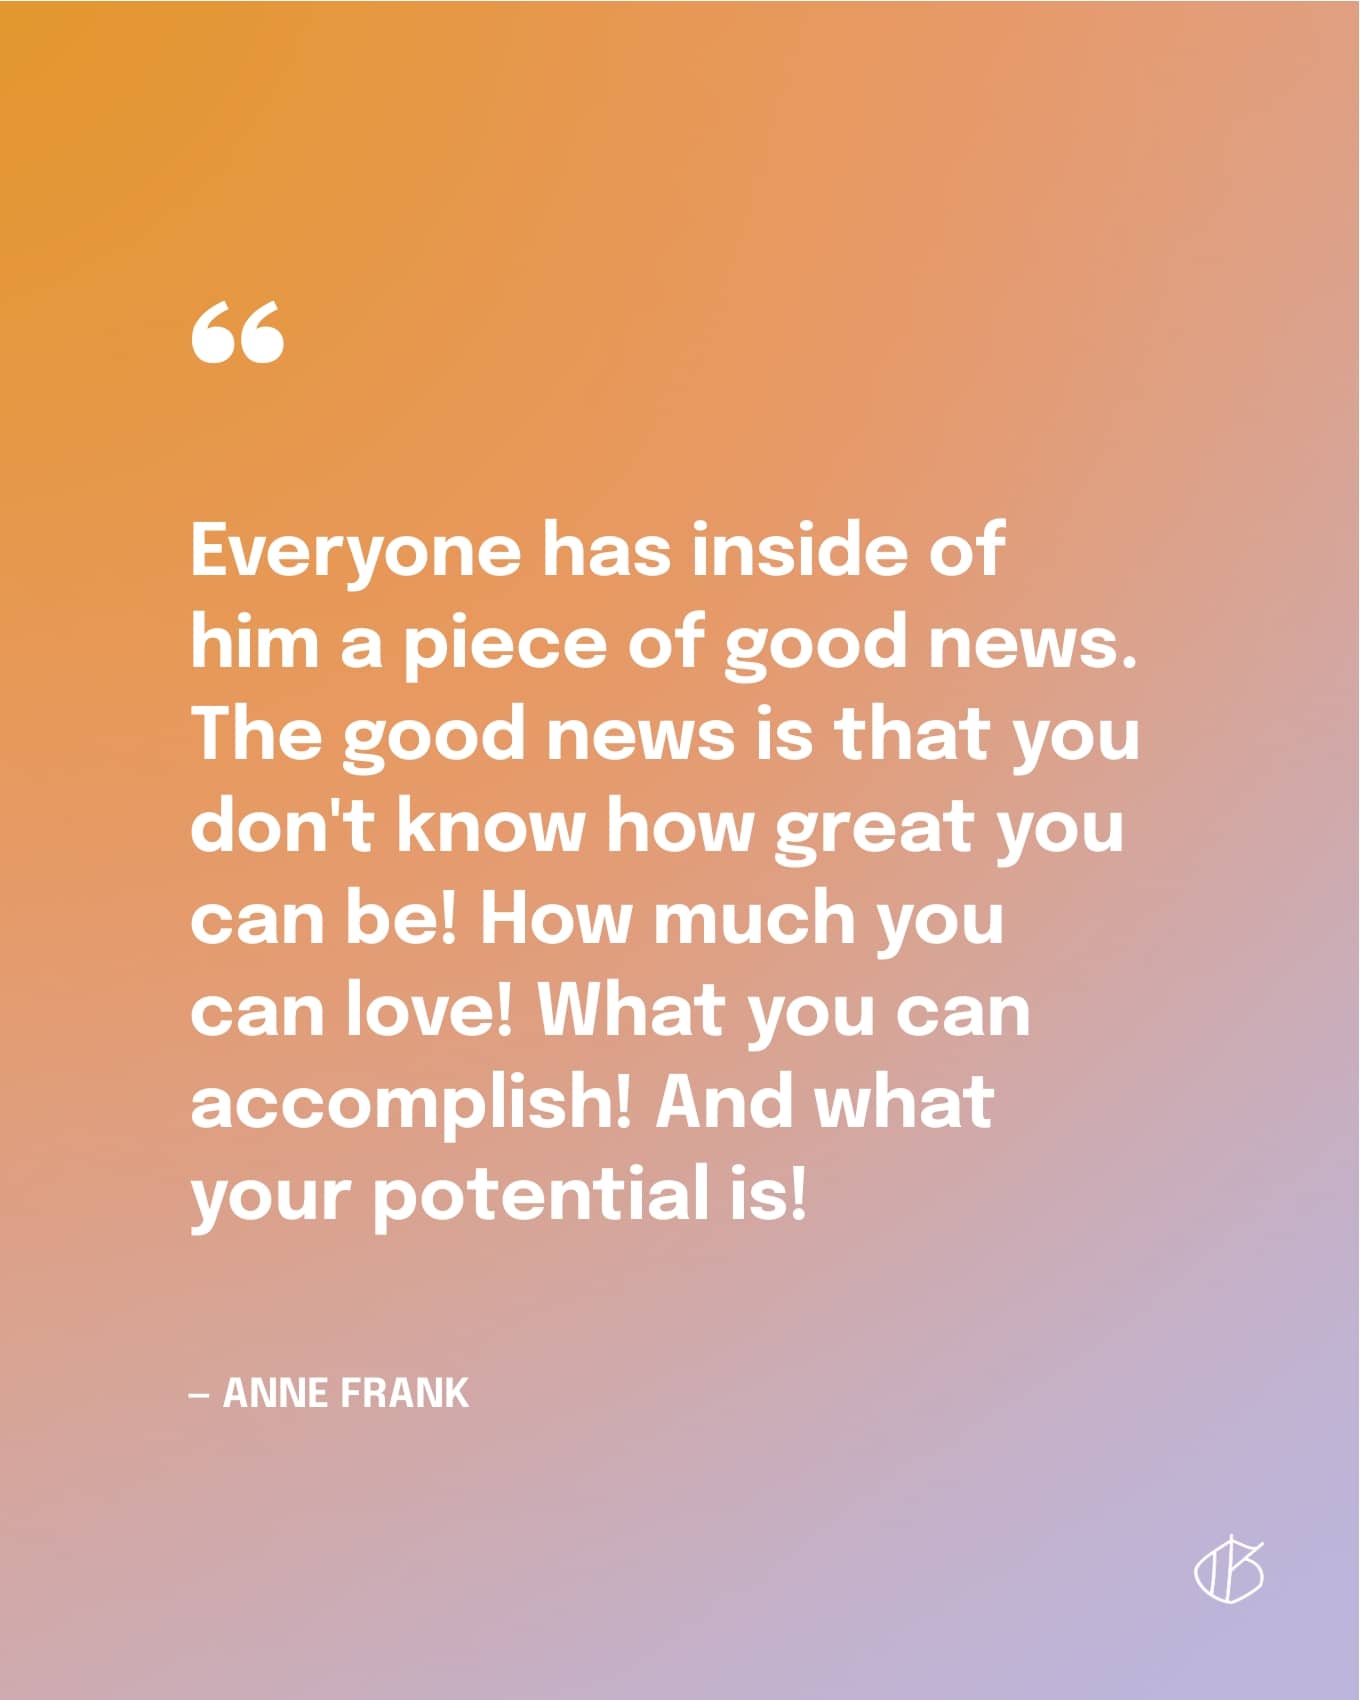 Quote: “Everyone has inside of him a piece of good news. The good news is that you don't know how great you can be! How much you can love! What you can accomplish! And what your potential is!” — Anne Frank